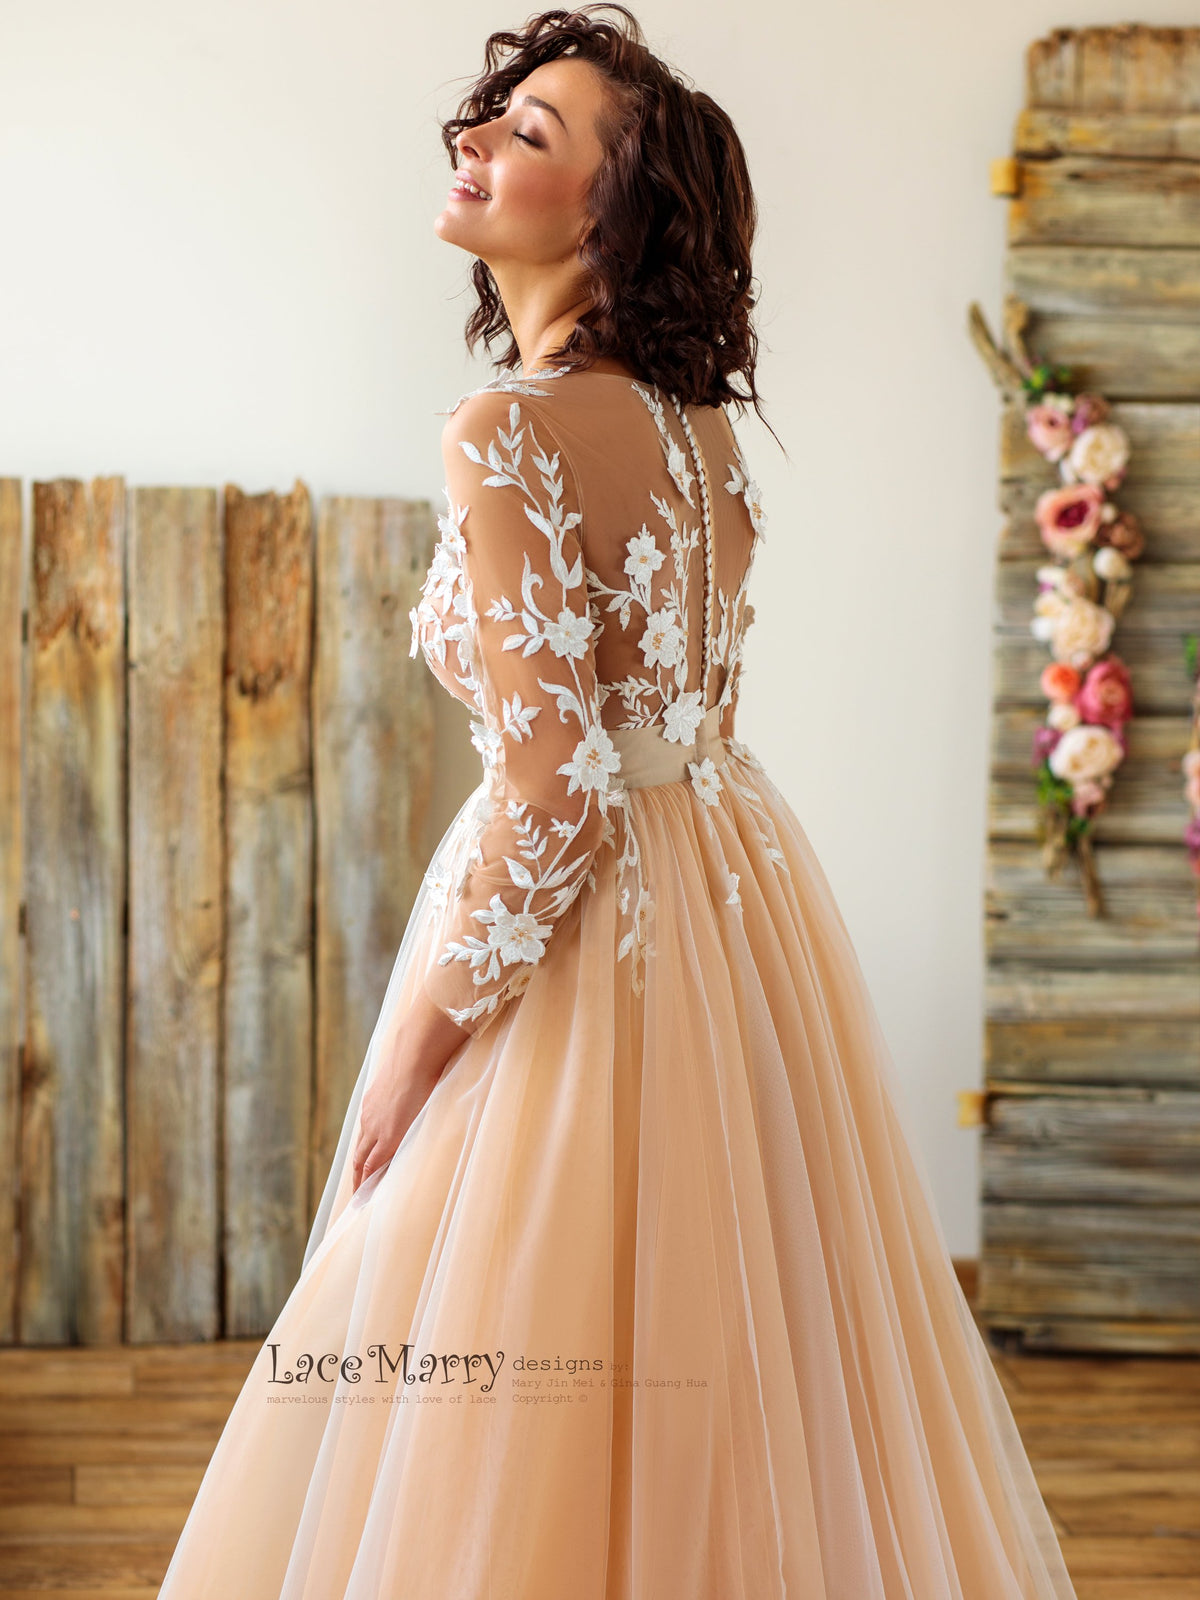 Boho Wedding Dress with Long Lace Sleeves in Nude Color